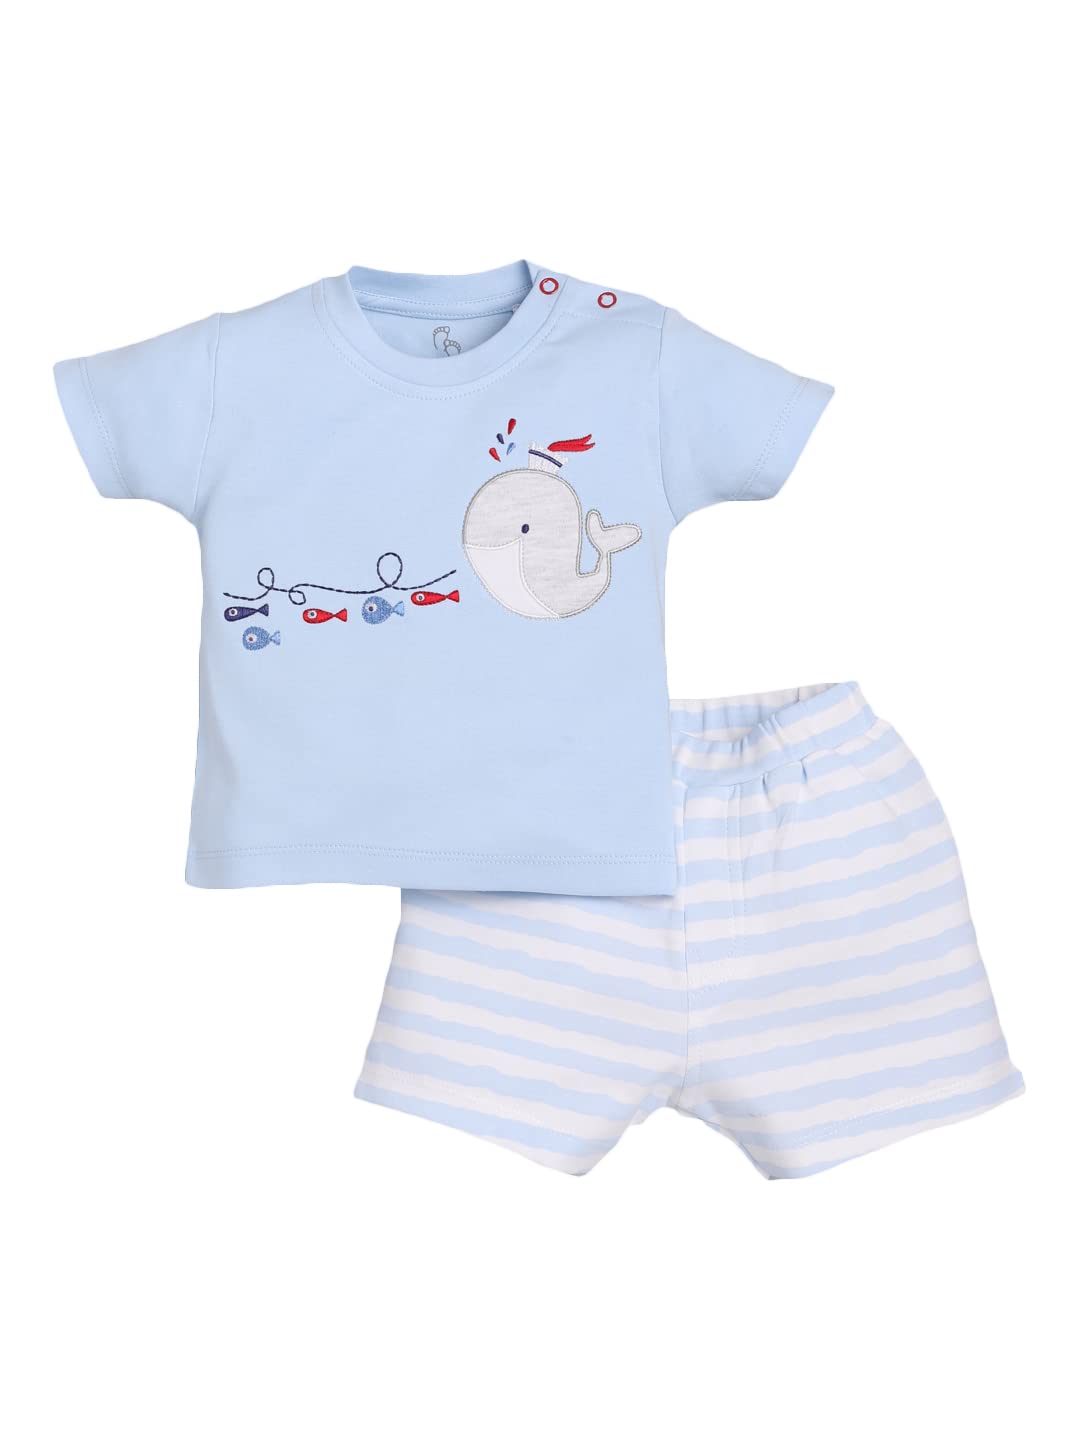 Baby Go 100% Pure Cotton Kids T-Shirt & Shorts for Baby Boys 3 Month